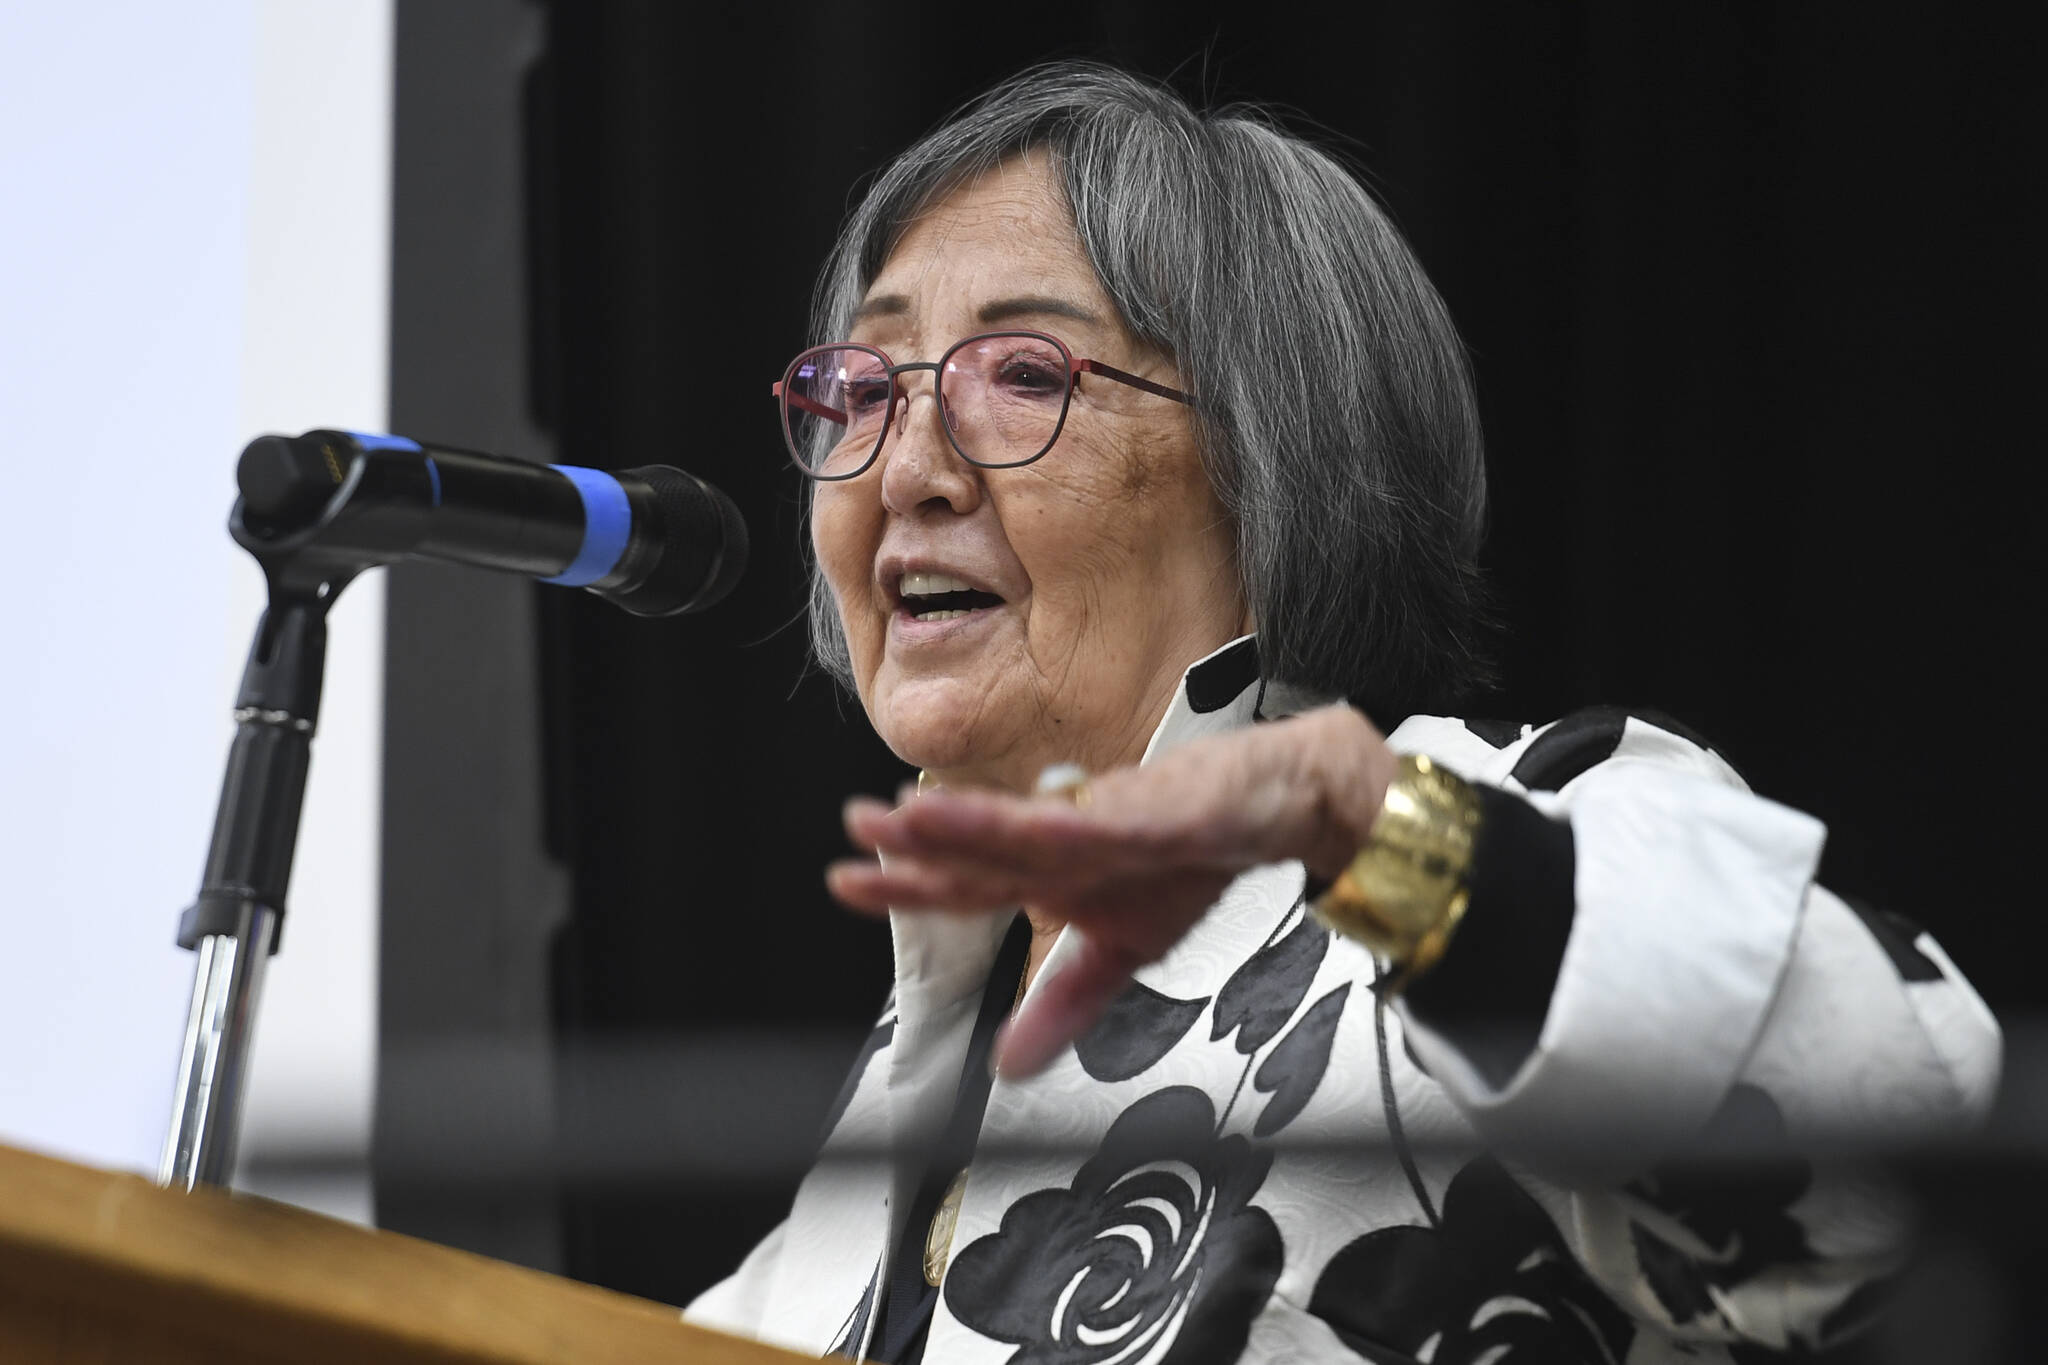 In this September 2019 photo, Rosita Kaaháni Worl, president of Sealaska Heritage Institute, gives a presentation at the Sharing Our Knowledge conference, on blood quantum and how it relates to enrollment of shareholders in Native corporations. (Michael Penn / Juneau Empire File)